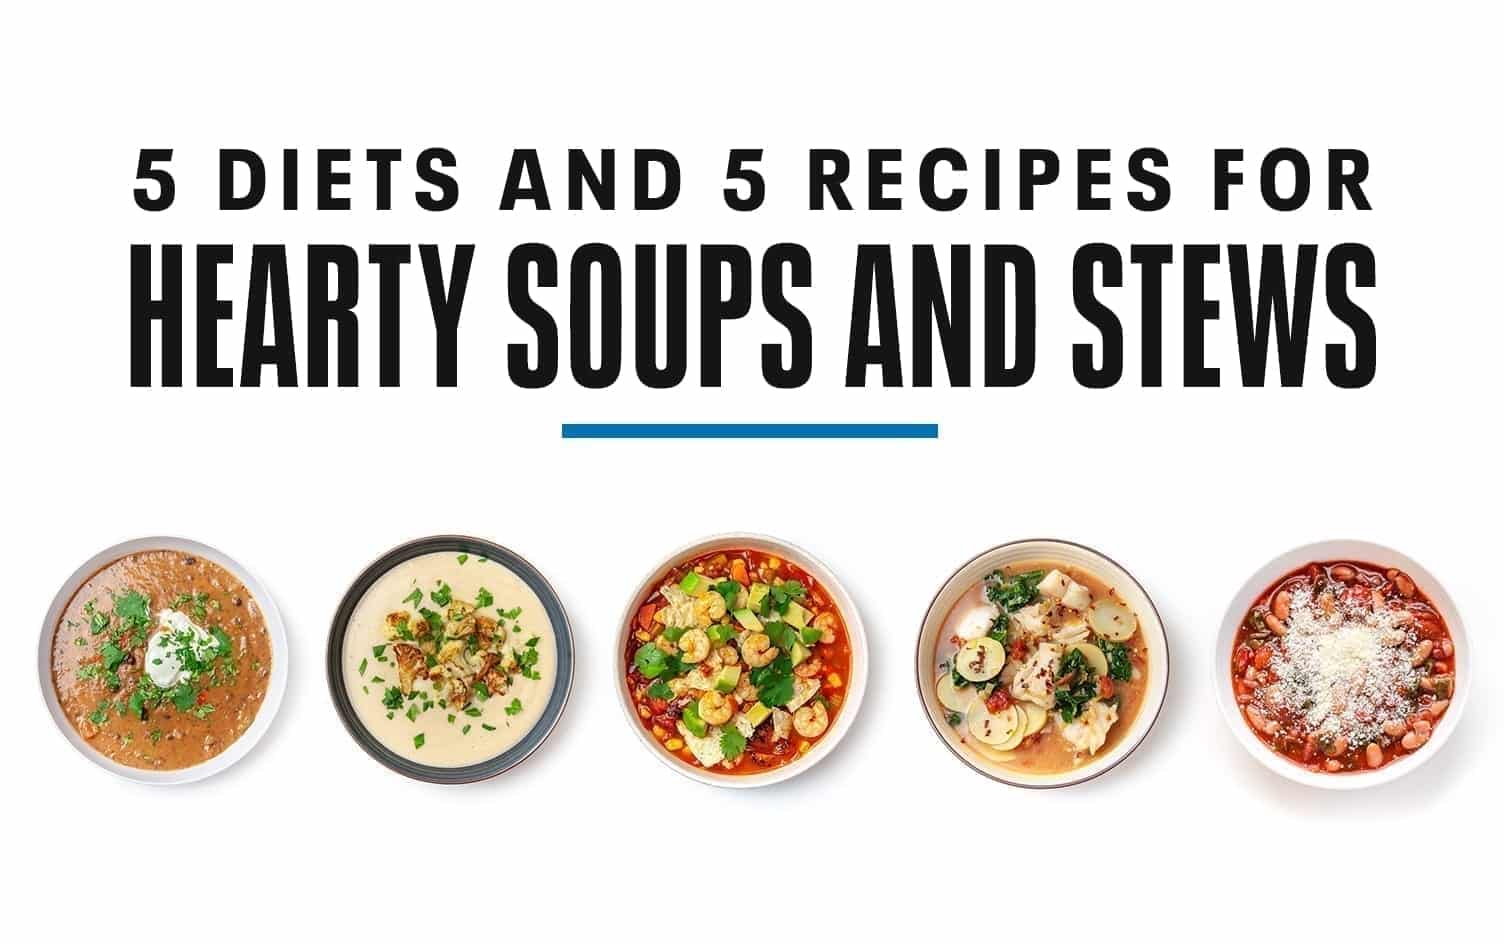 5 Diet-Friendly Recipes For Hearty Soups and Stews